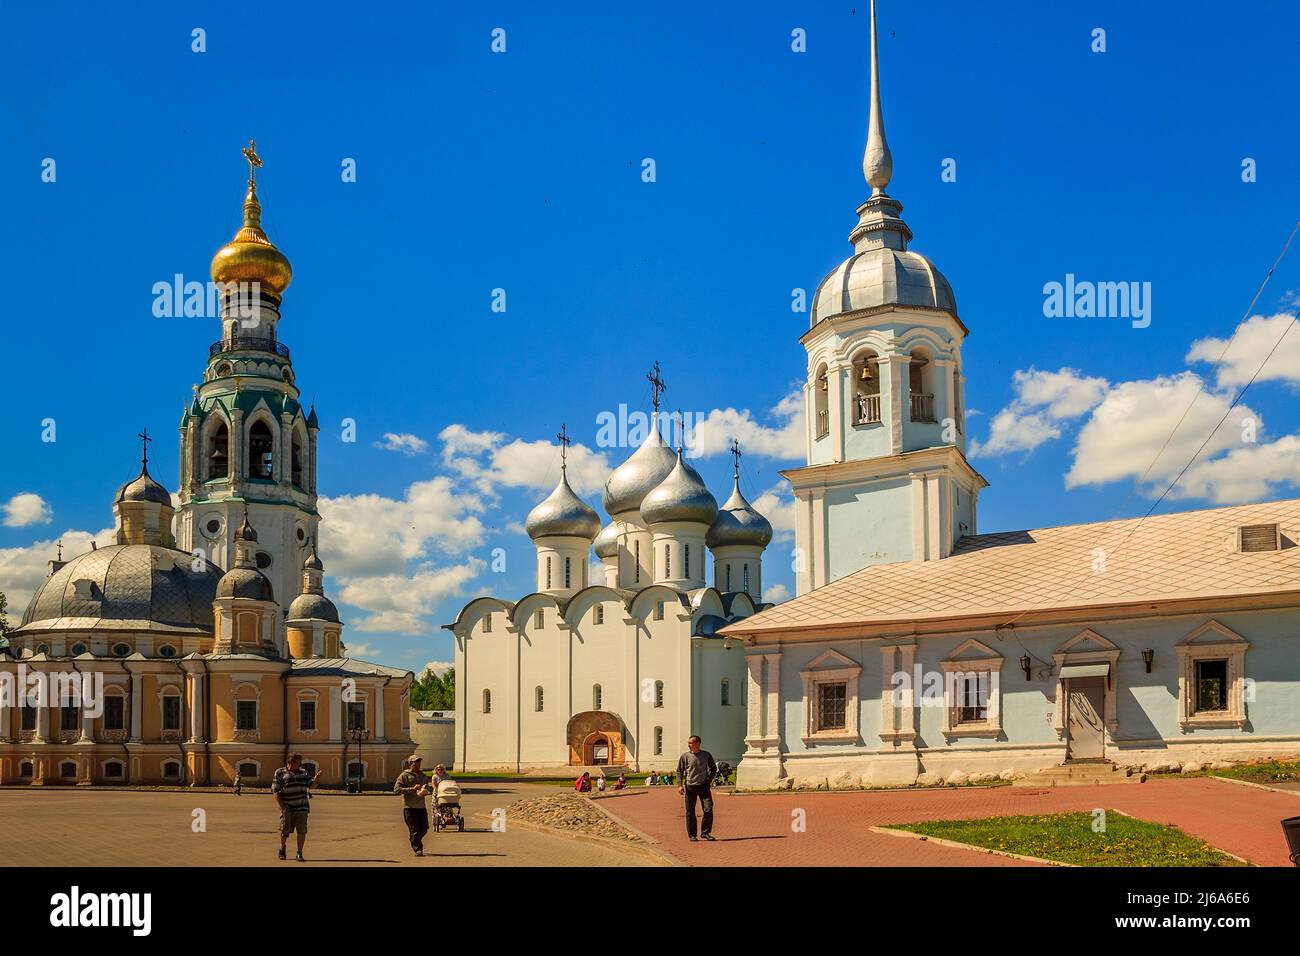 This is a historic city center with the city's main cathedrals and churches: St. Sophia, Resurrection, Alexander Nevsky and the bell tower of the Krem Stock Photo